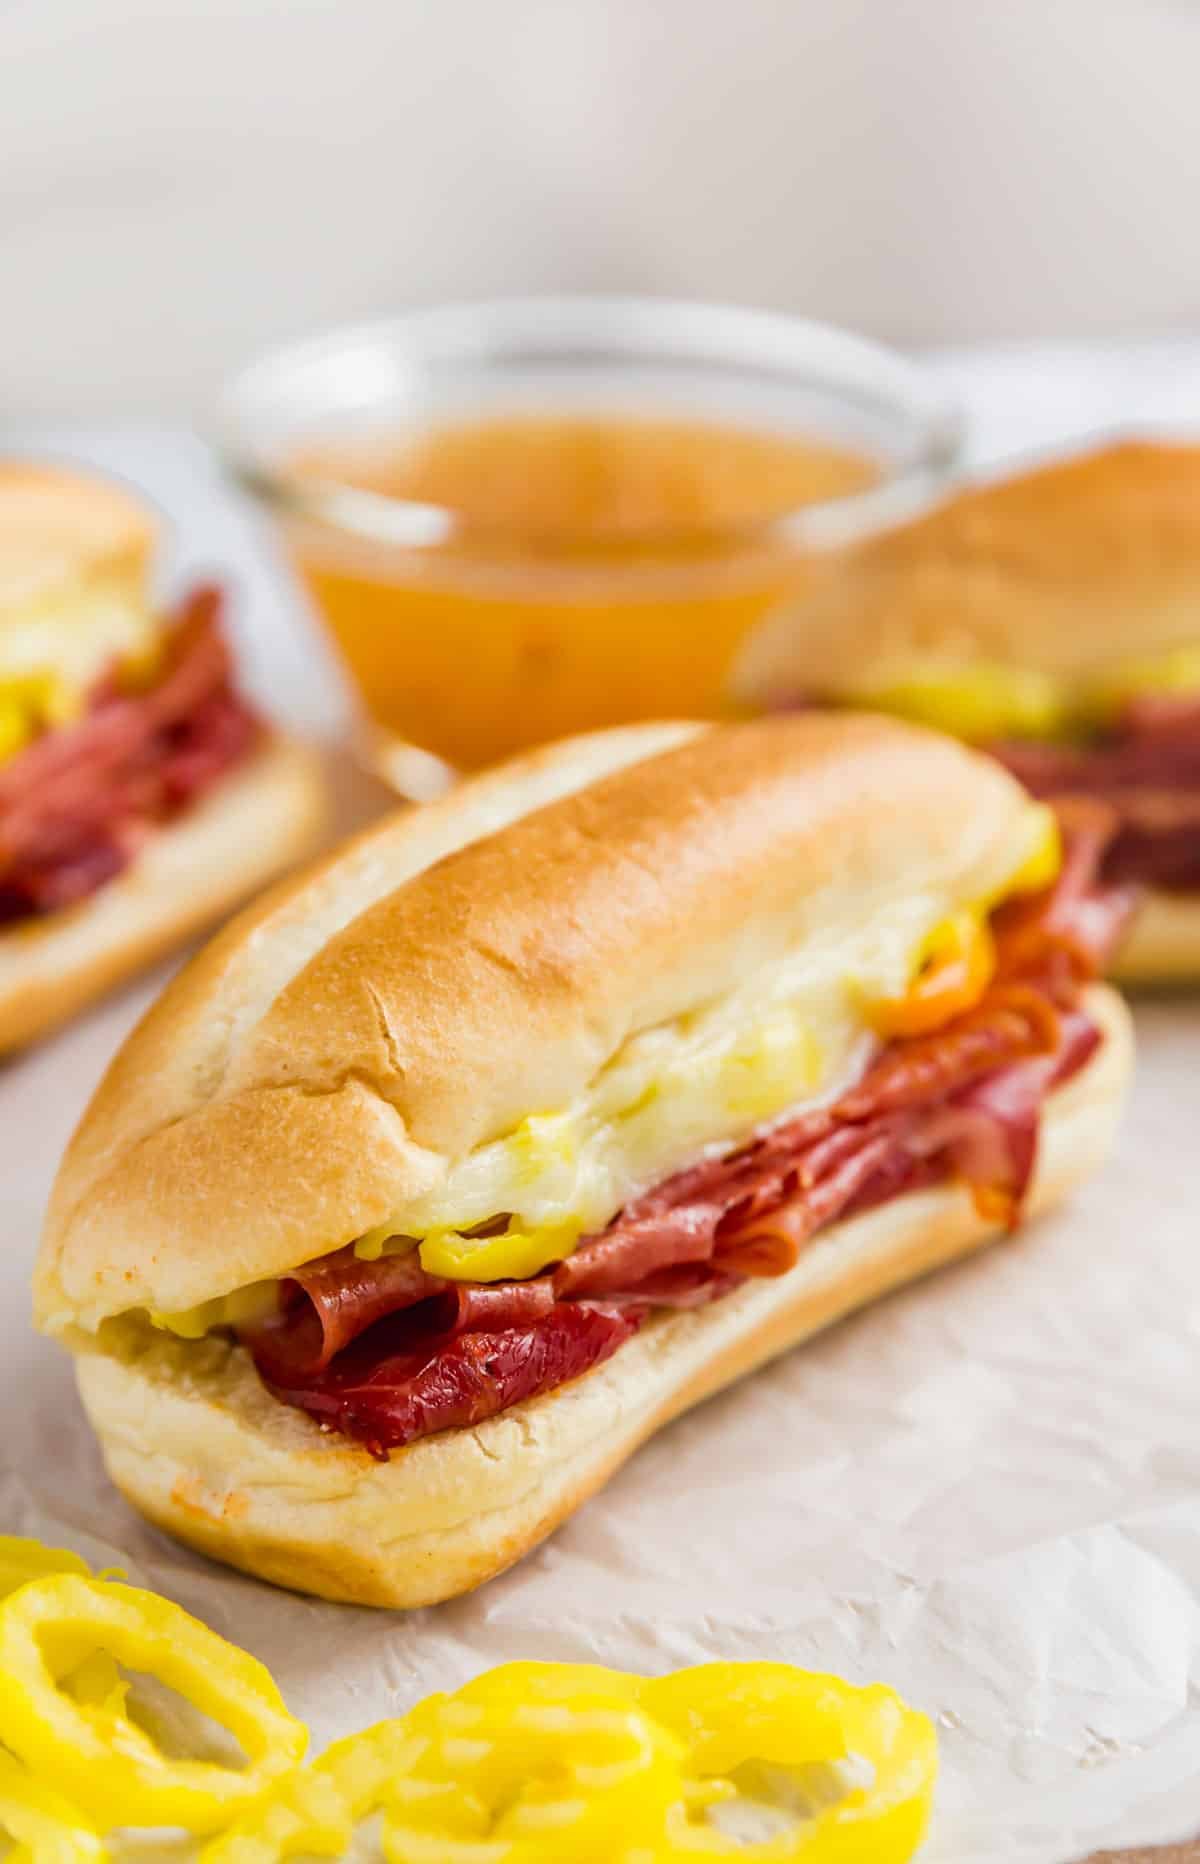 An image of an Italian sub sandwich with some banana peppers in front of it with other sandwiches and a bowl of Italian dressing in the background.